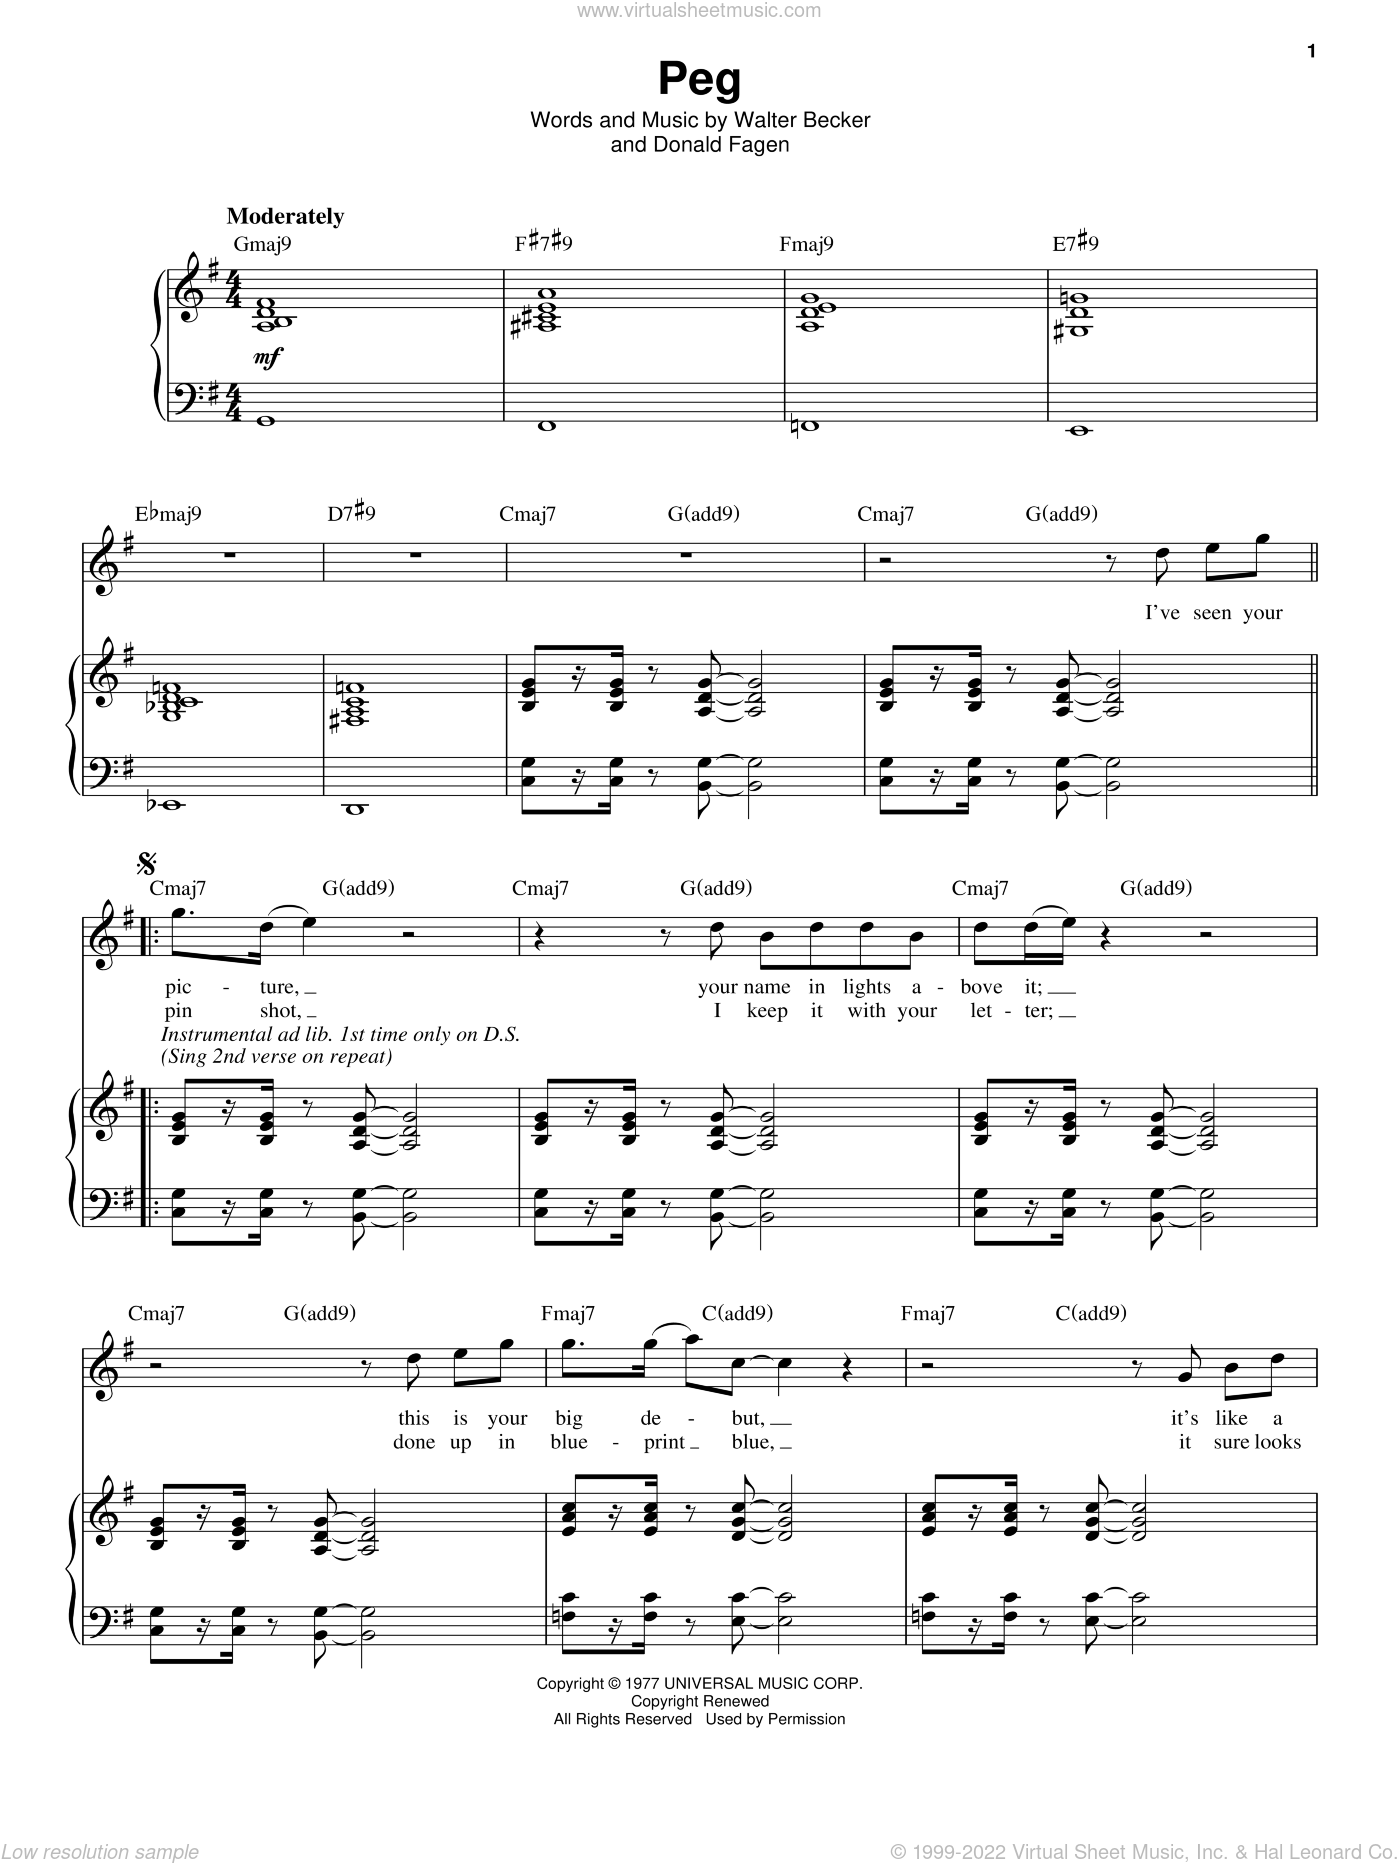 Peg sheet music for voice and piano (PDF-interactive)